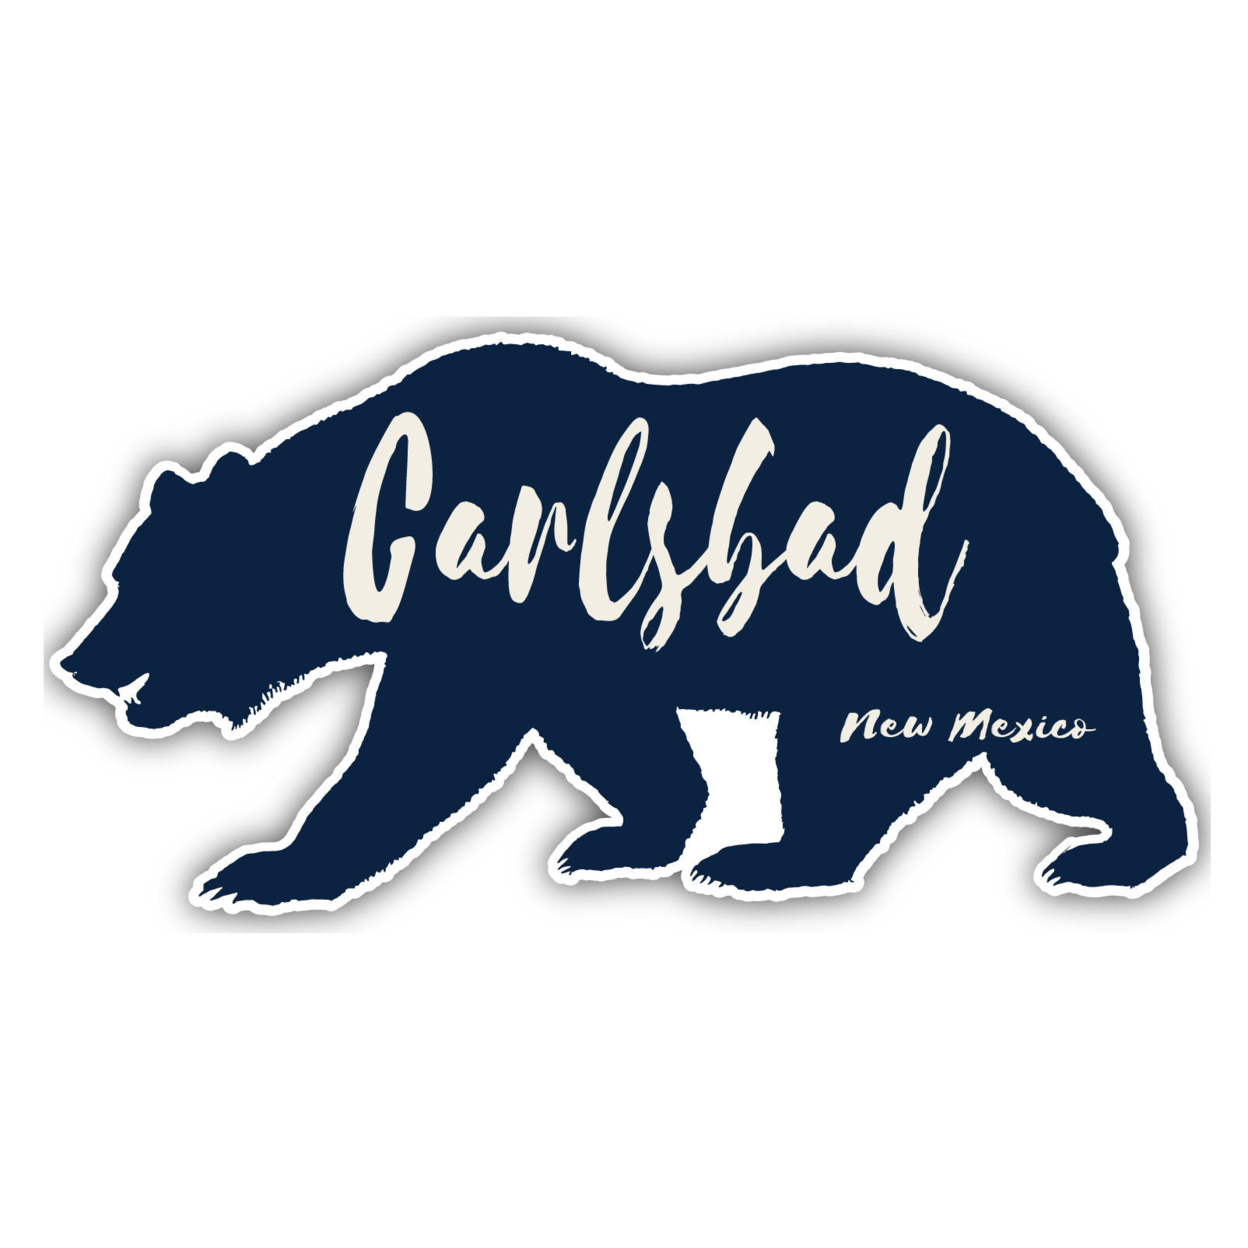 Carlsbad New Mexico Souvenir Decorative Stickers (Choose Theme And Size) - Single Unit, 10-Inch, Great Outdoors